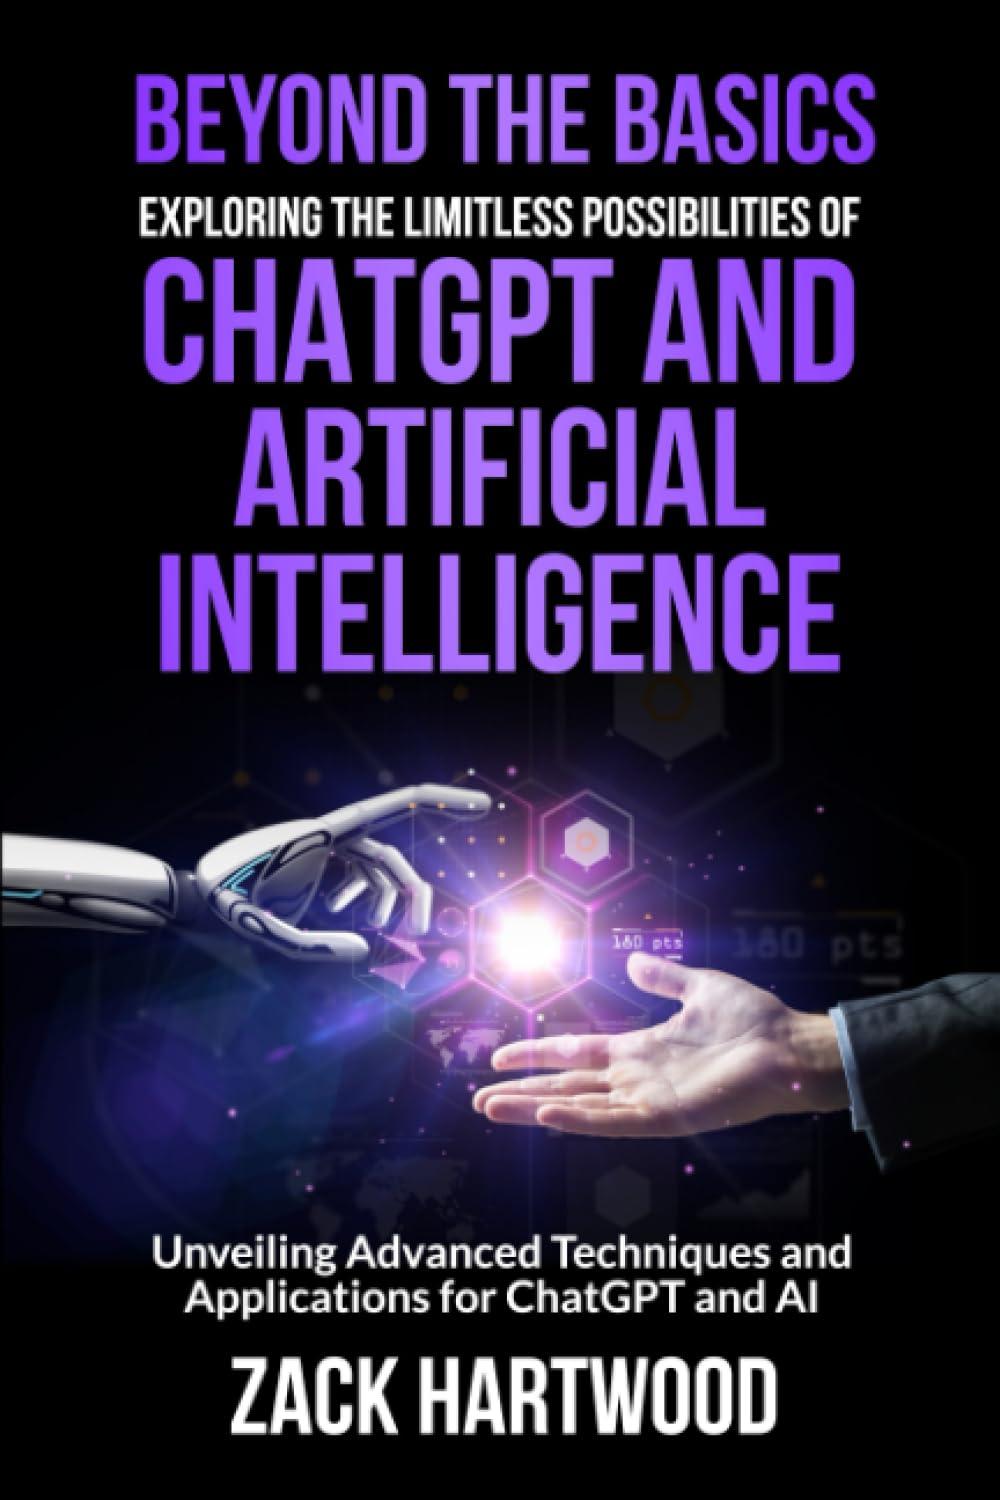 beyond the basics exploring the limitless possibilities of chatgpt and artificial intelligence unveiling